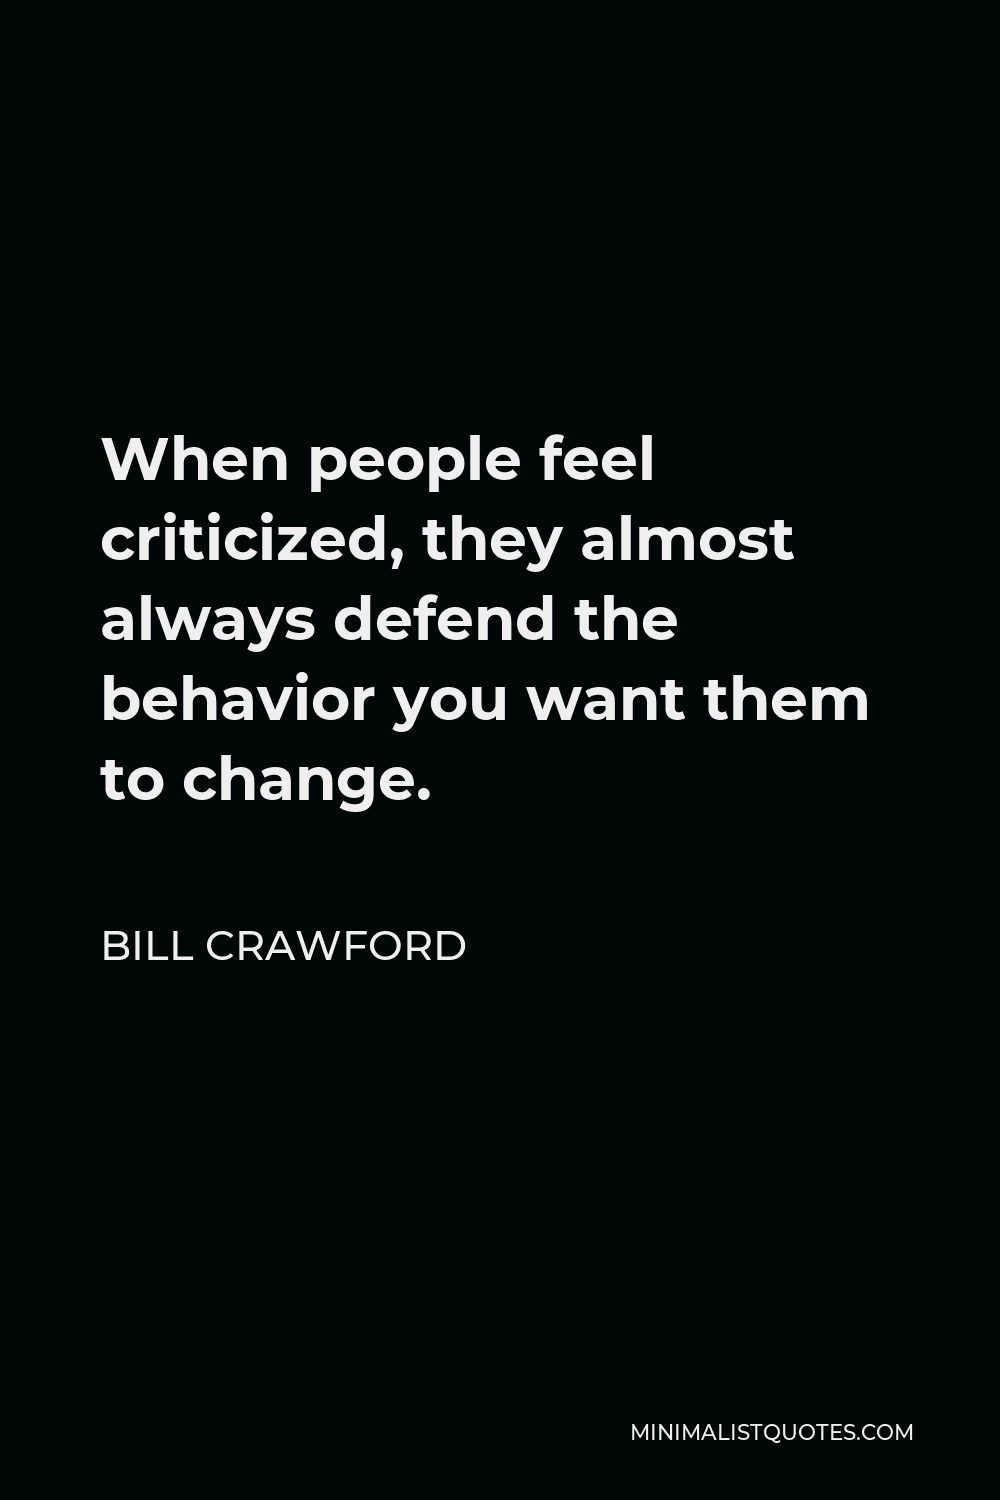 Bill Crawford Quote - When people feel criticized, they almost always defend the behavior you want them to change.